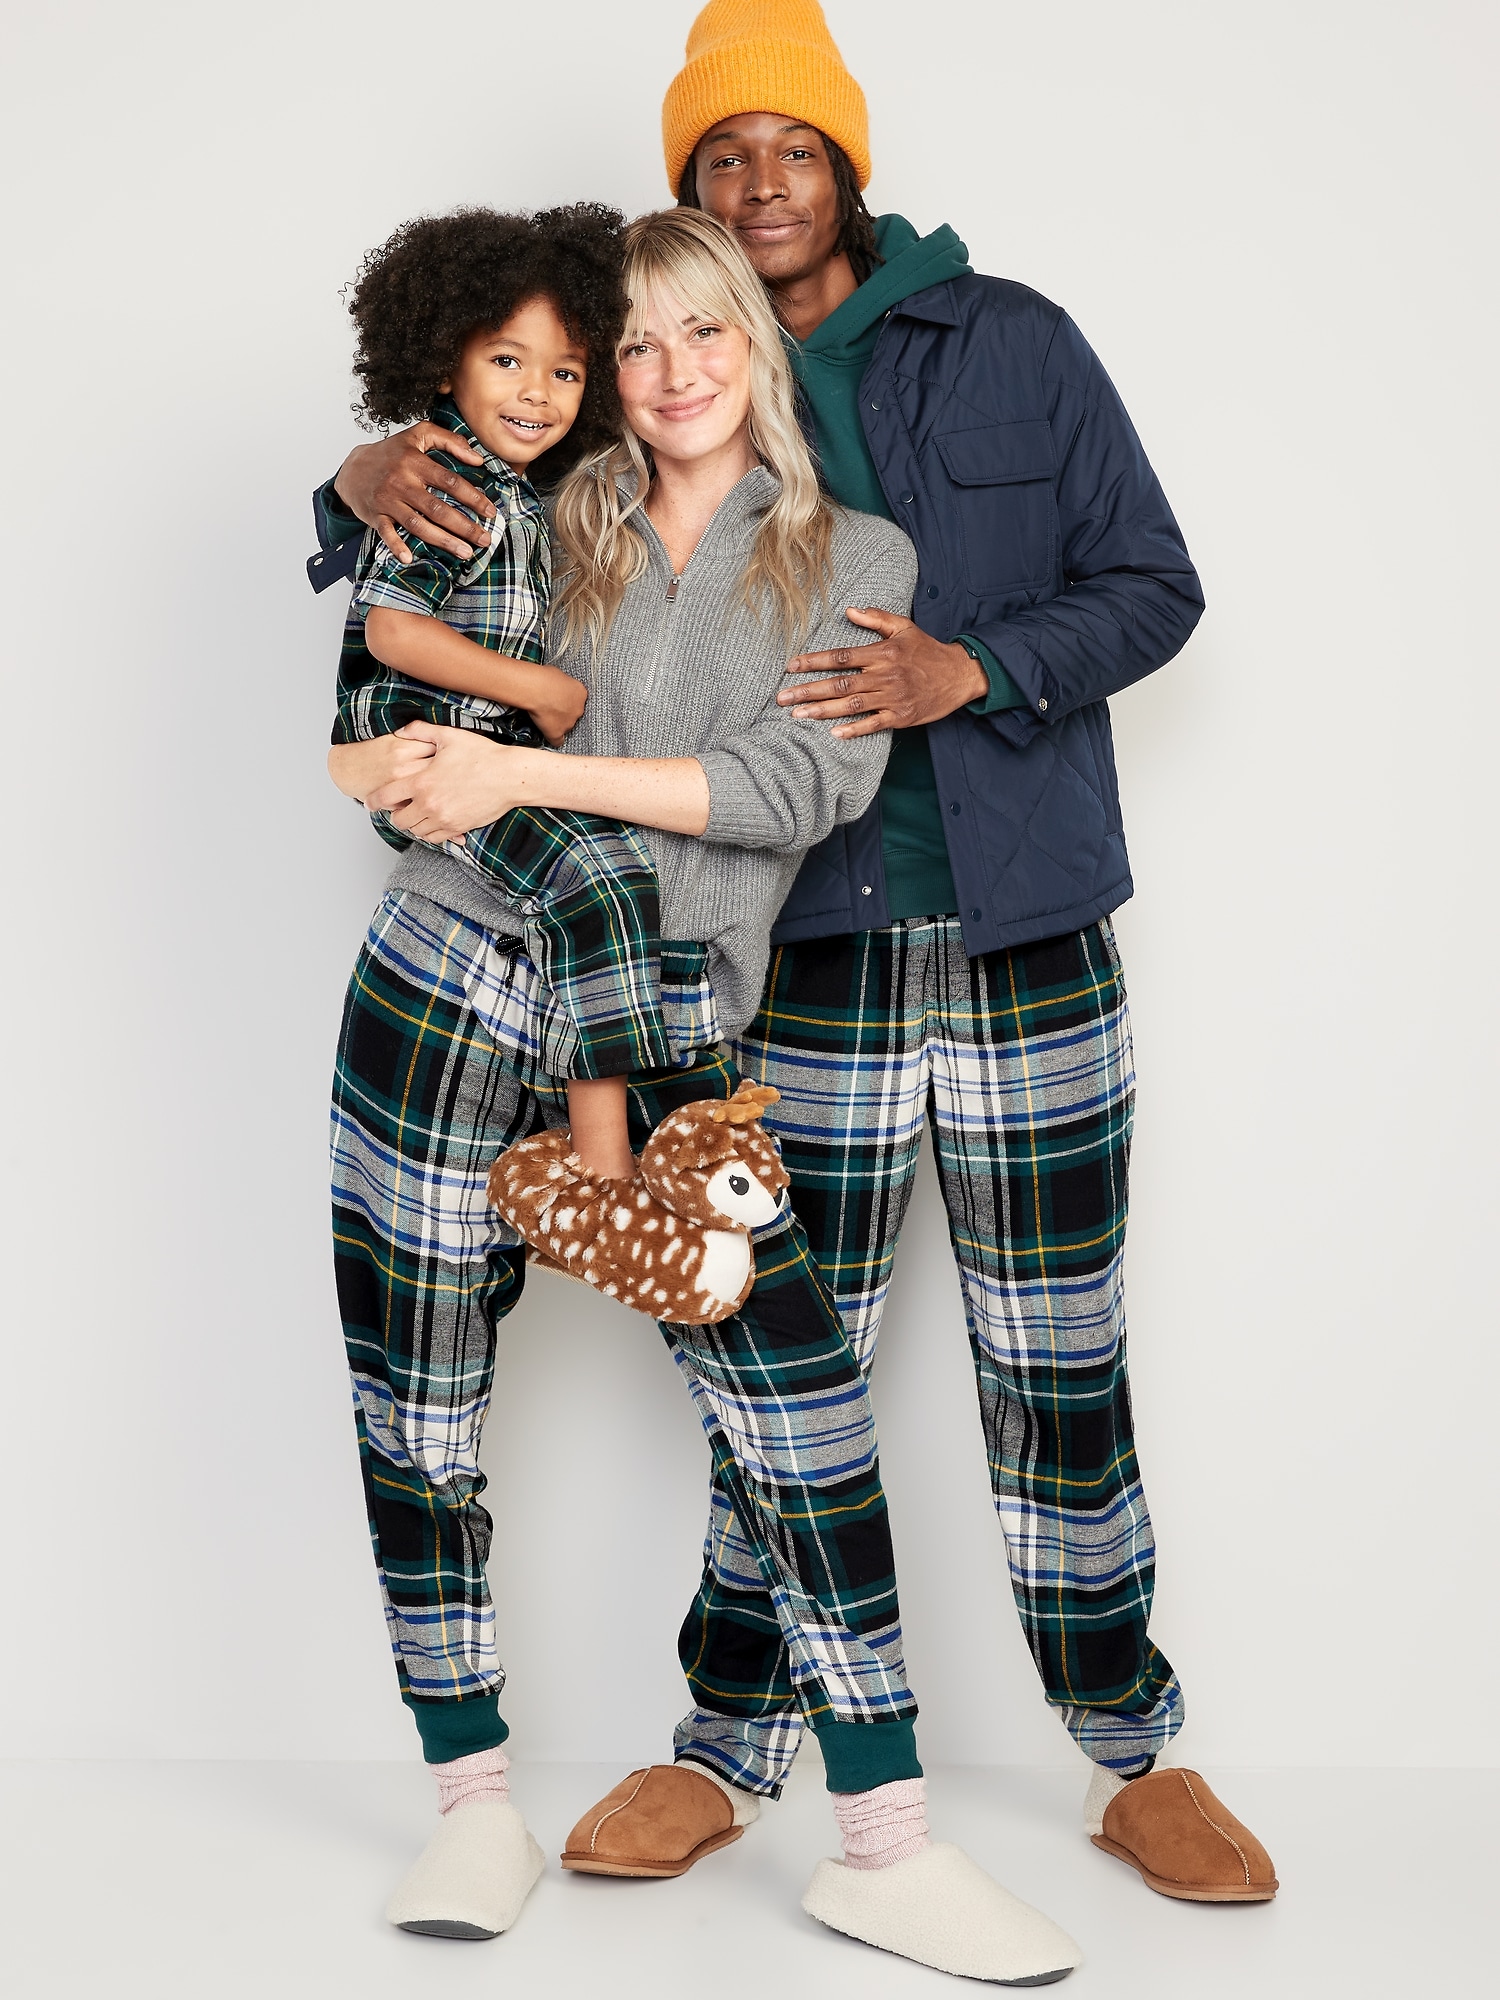 Double-Brushed Flannel Pajama Pants